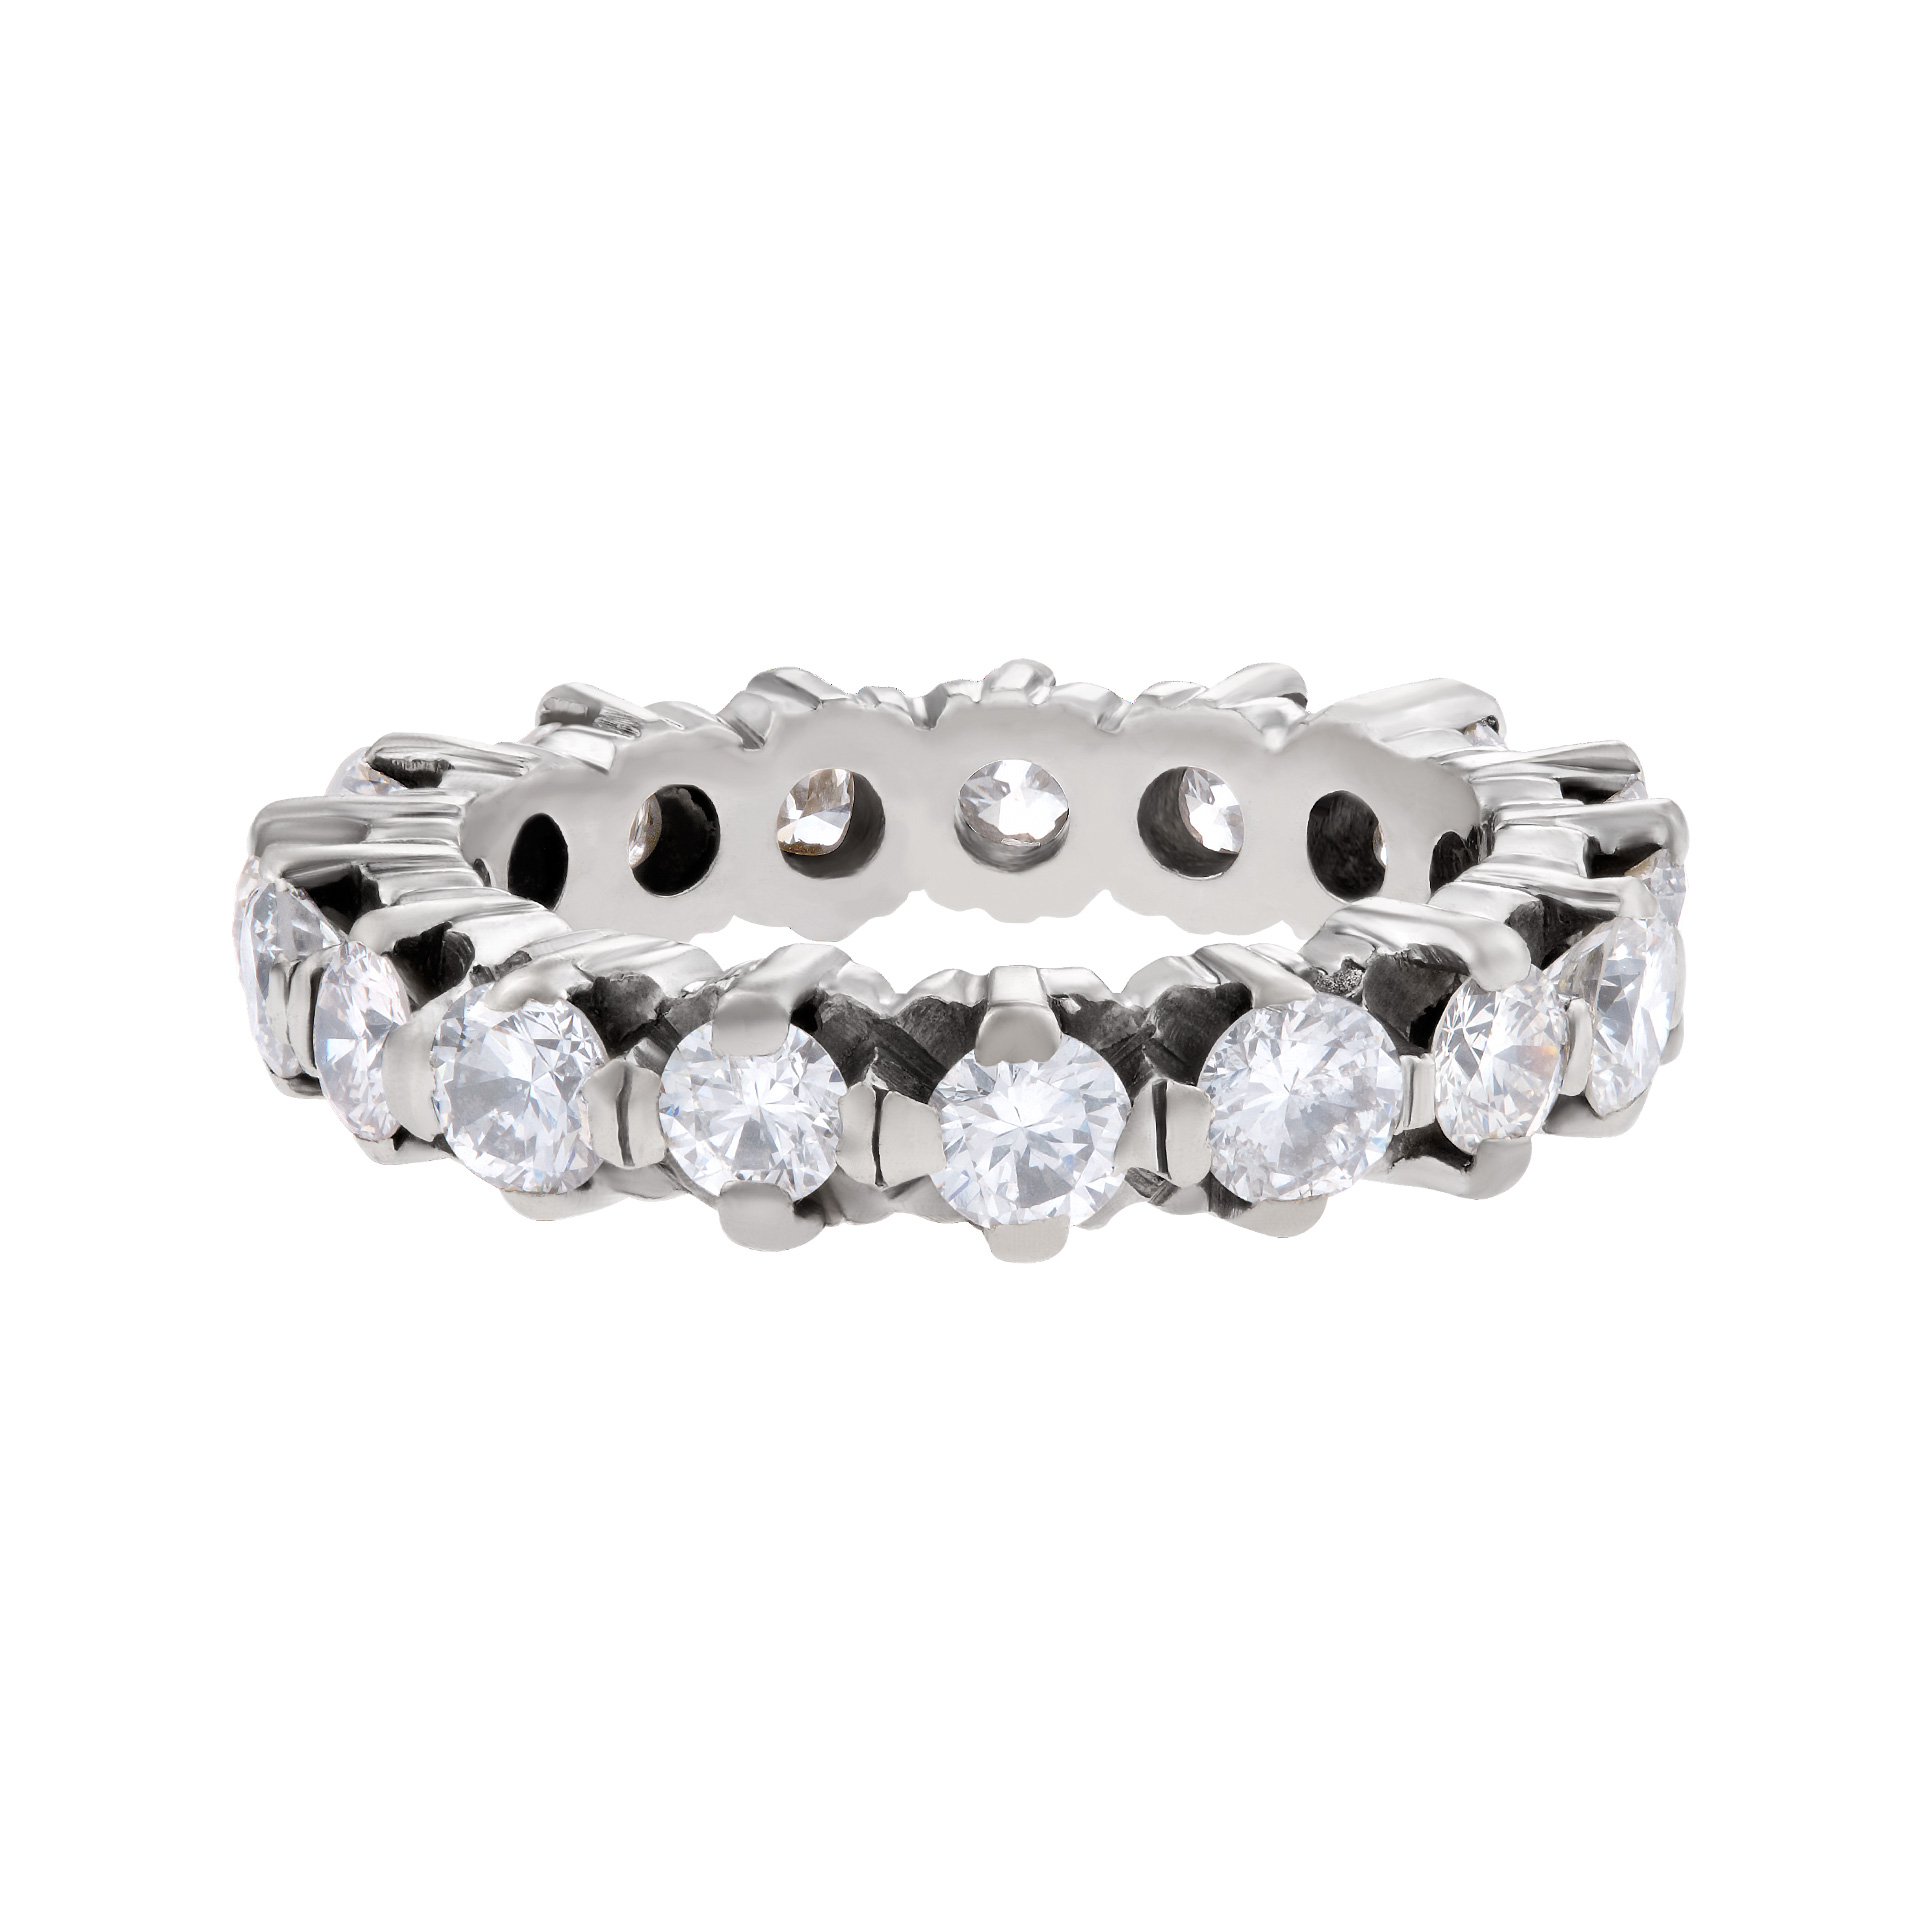 Eternity band in 18k white gold approx 2.5 cts in diamonds H-I color, SI1 clarity image 1